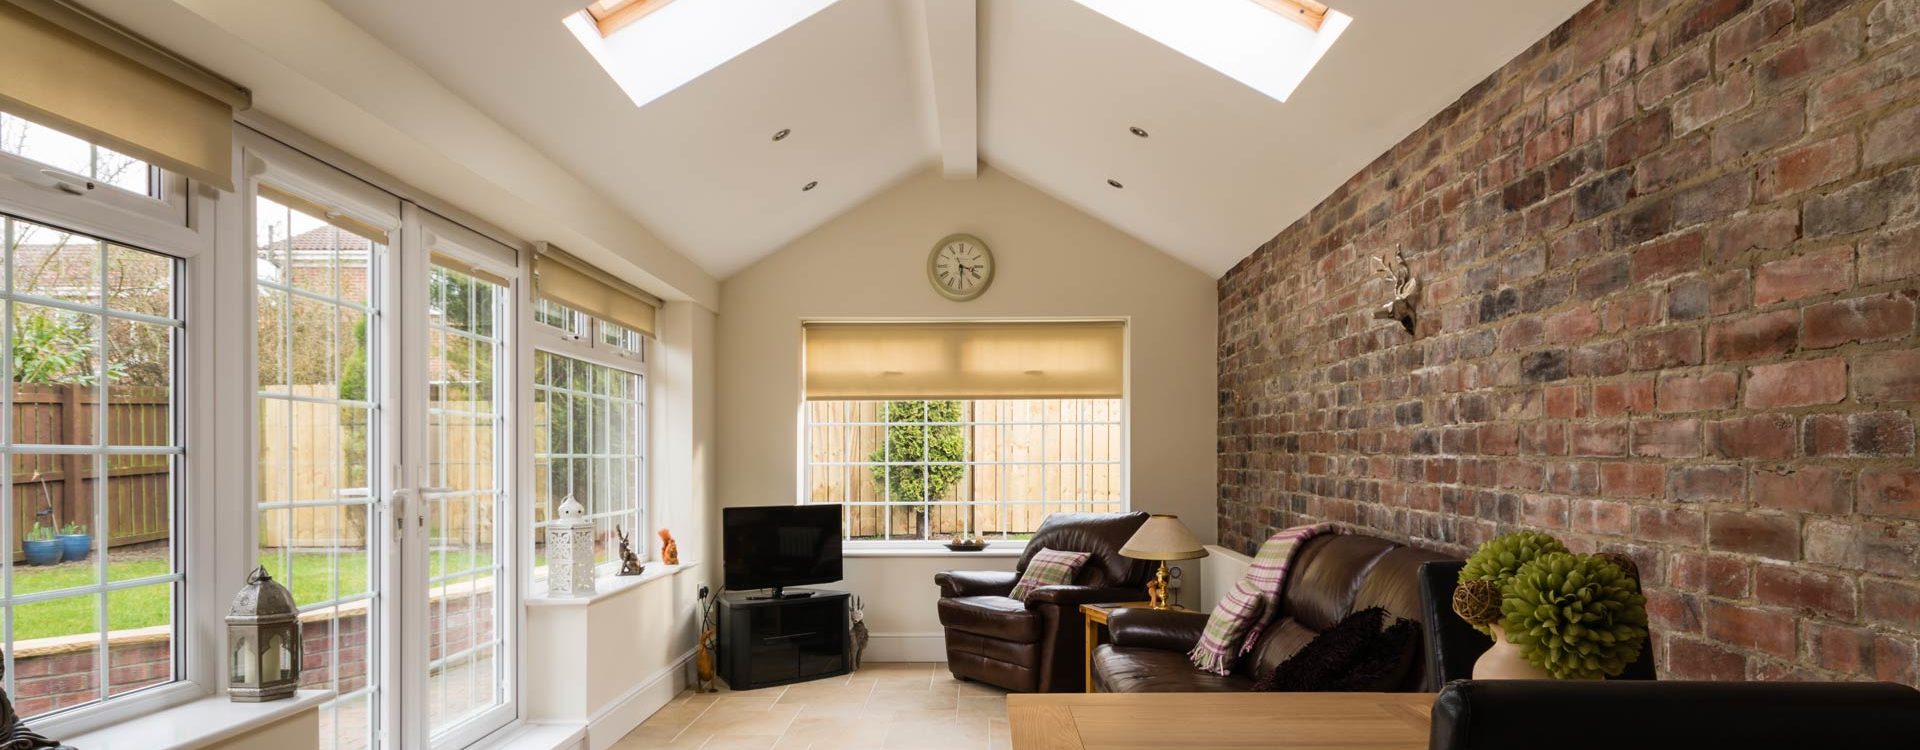 Conservatory Roof Suppliers Hampshire Conservatory Roof Prices